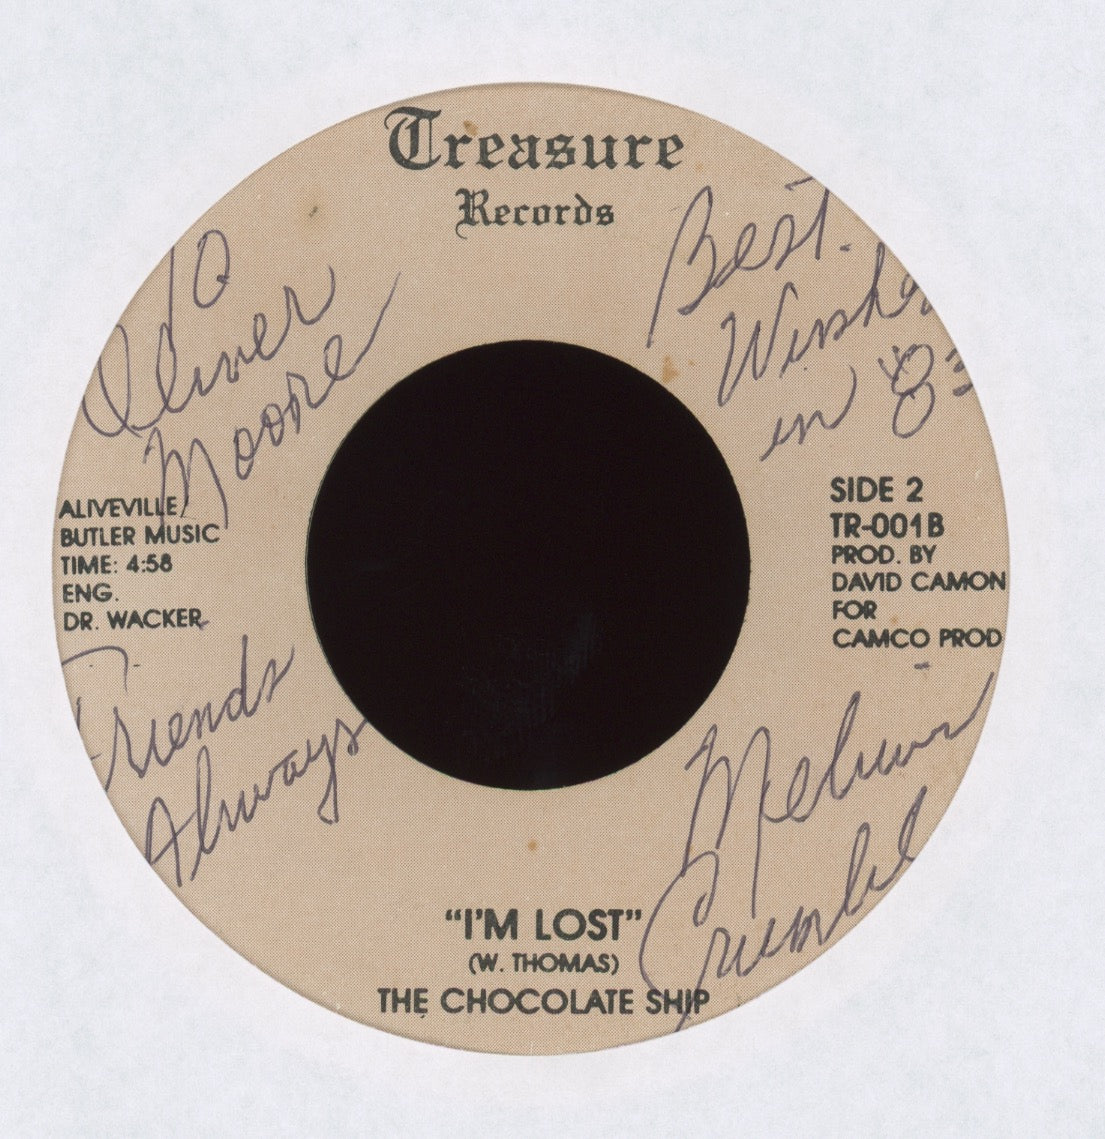 The Chocolate Ship - Sail With Me on Treasure Records